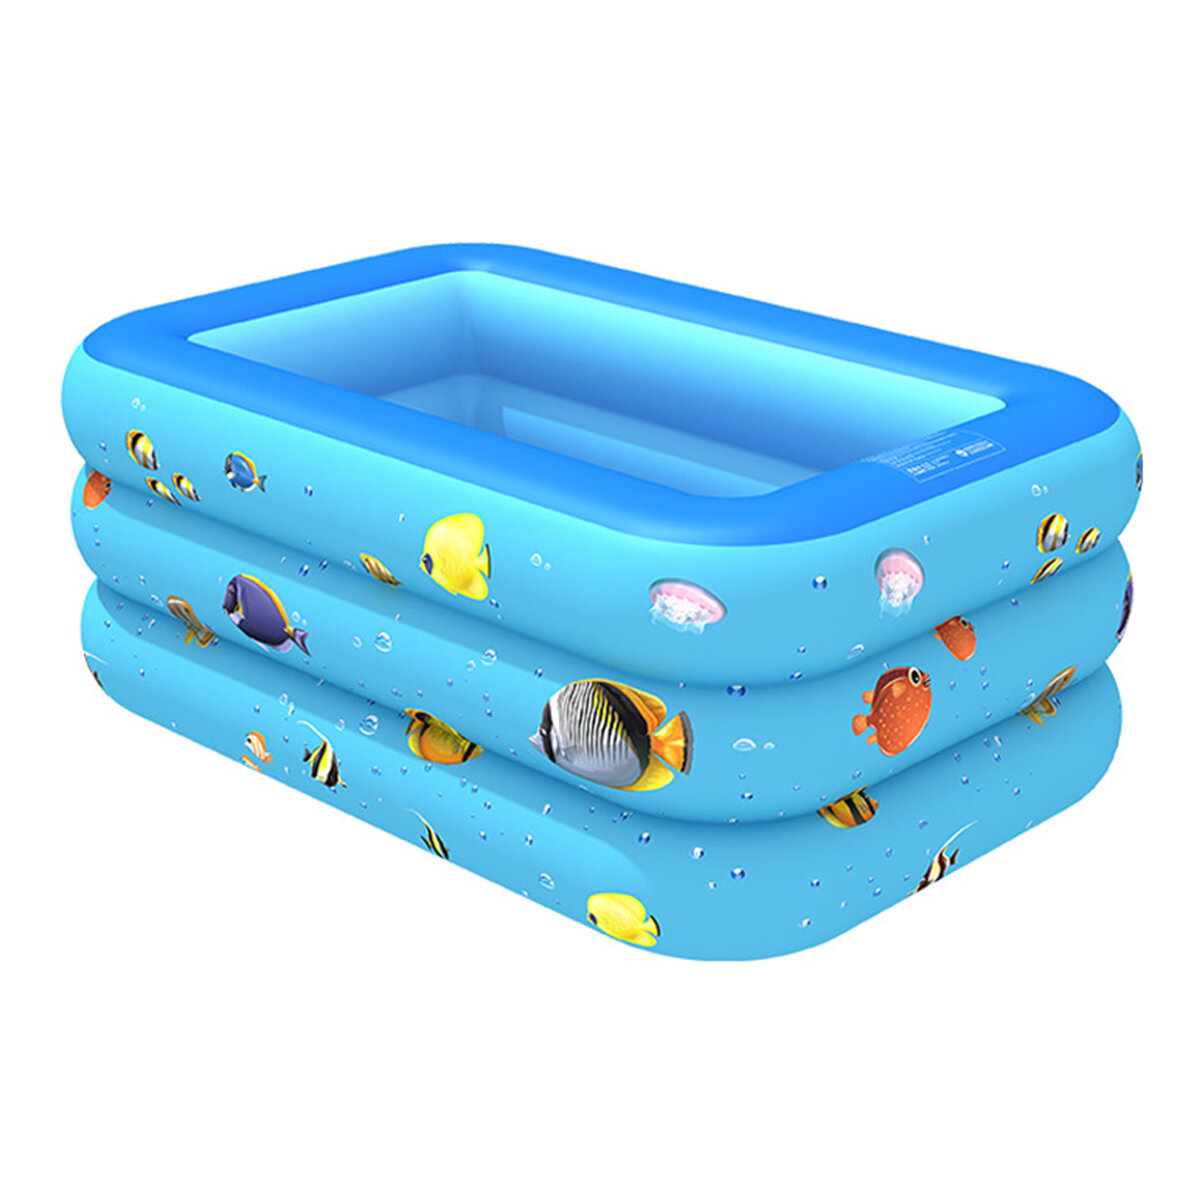 1.5m/1.8m/2.1m/2.6m/3m Inflatable Swimming Pool Thick Safe Inflatable Pool Summer Water Party Supply For Baby Kids Child